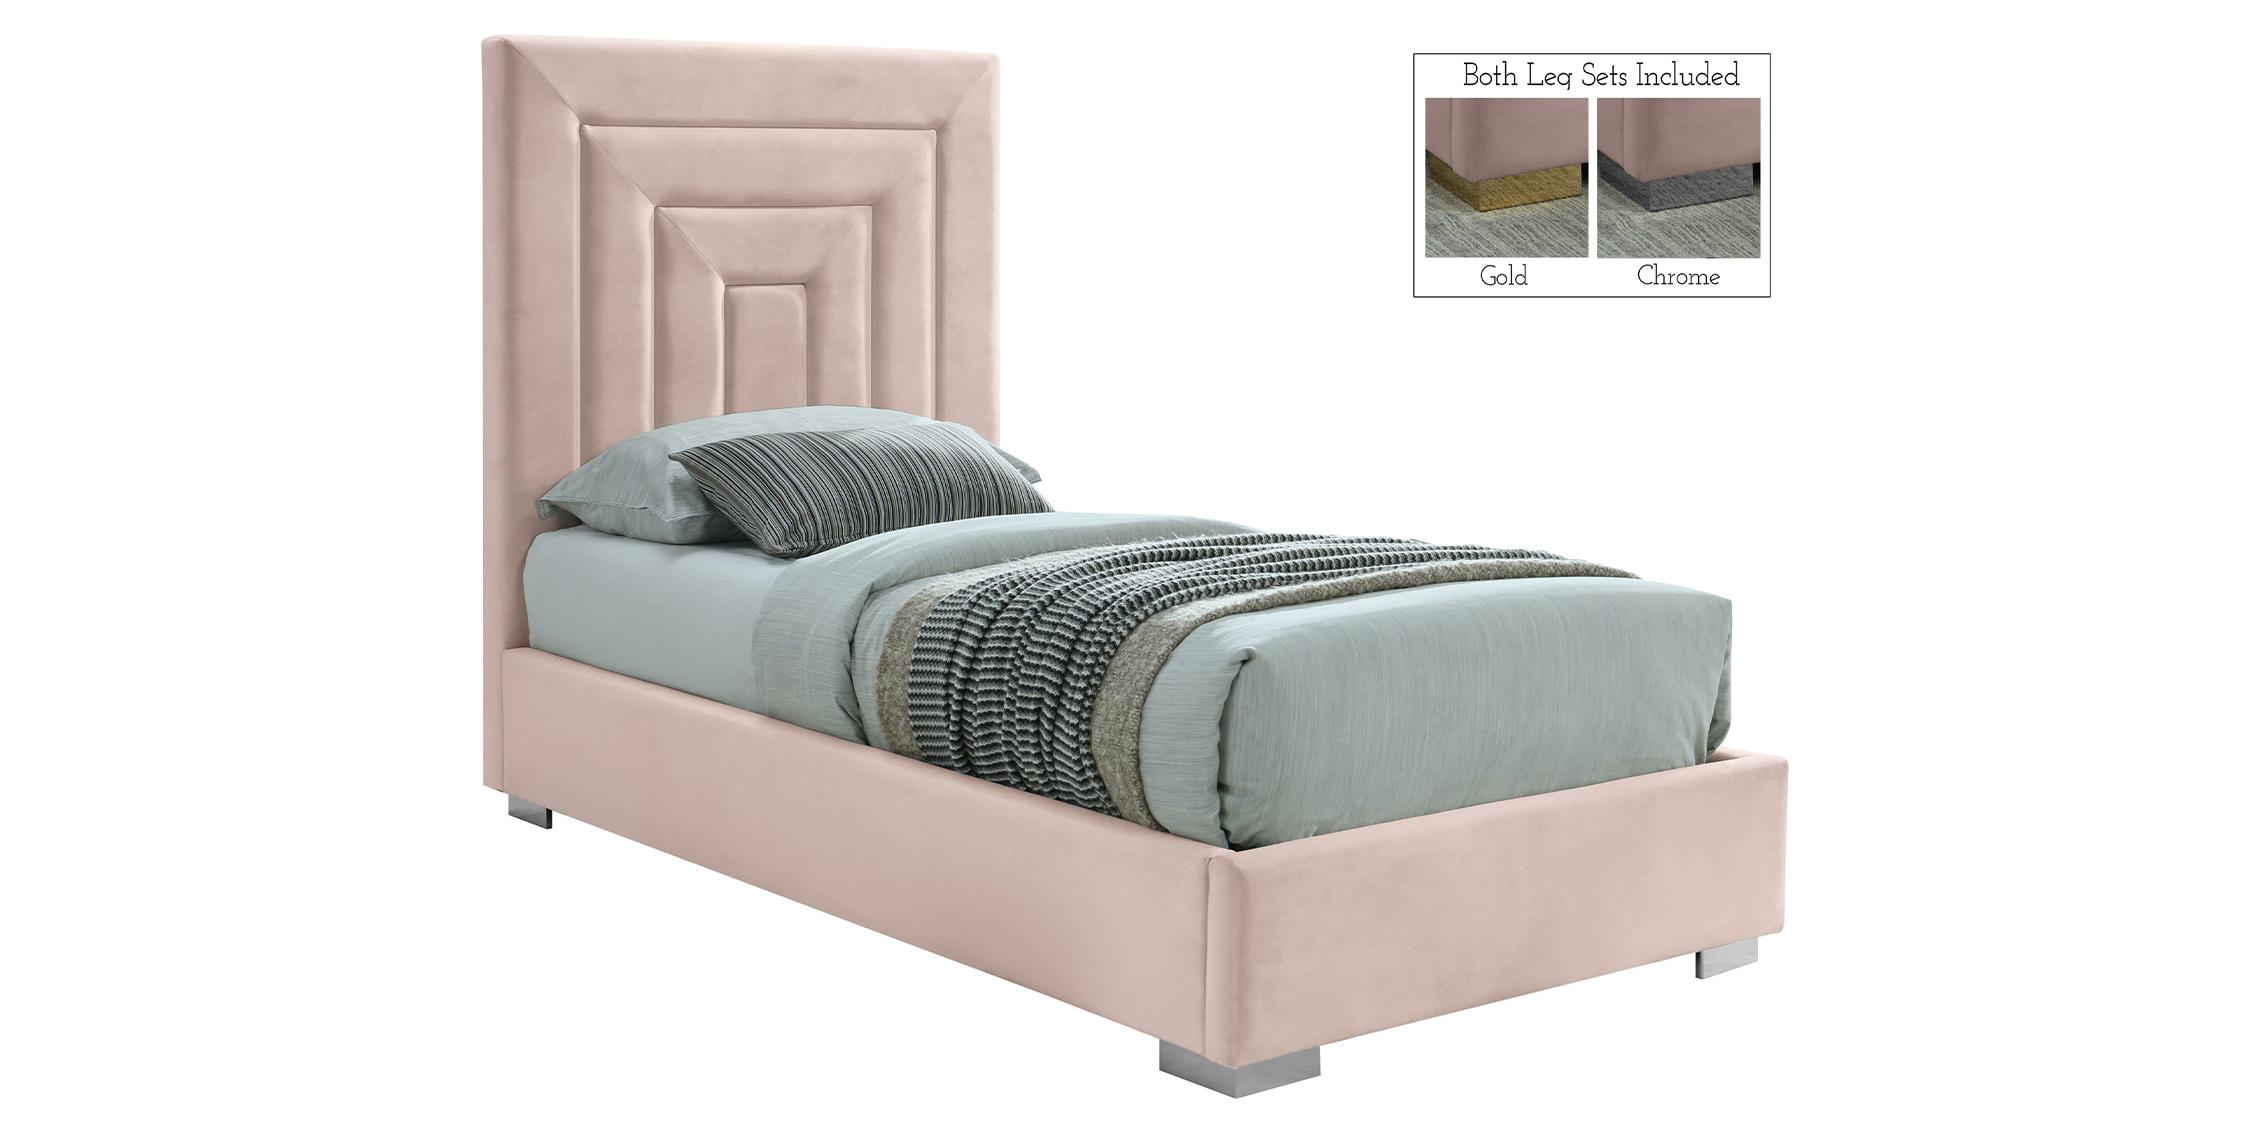 Contemporary, Modern Platform Bed NORA NoraPink-T NoraPink-T in Pink Fabric